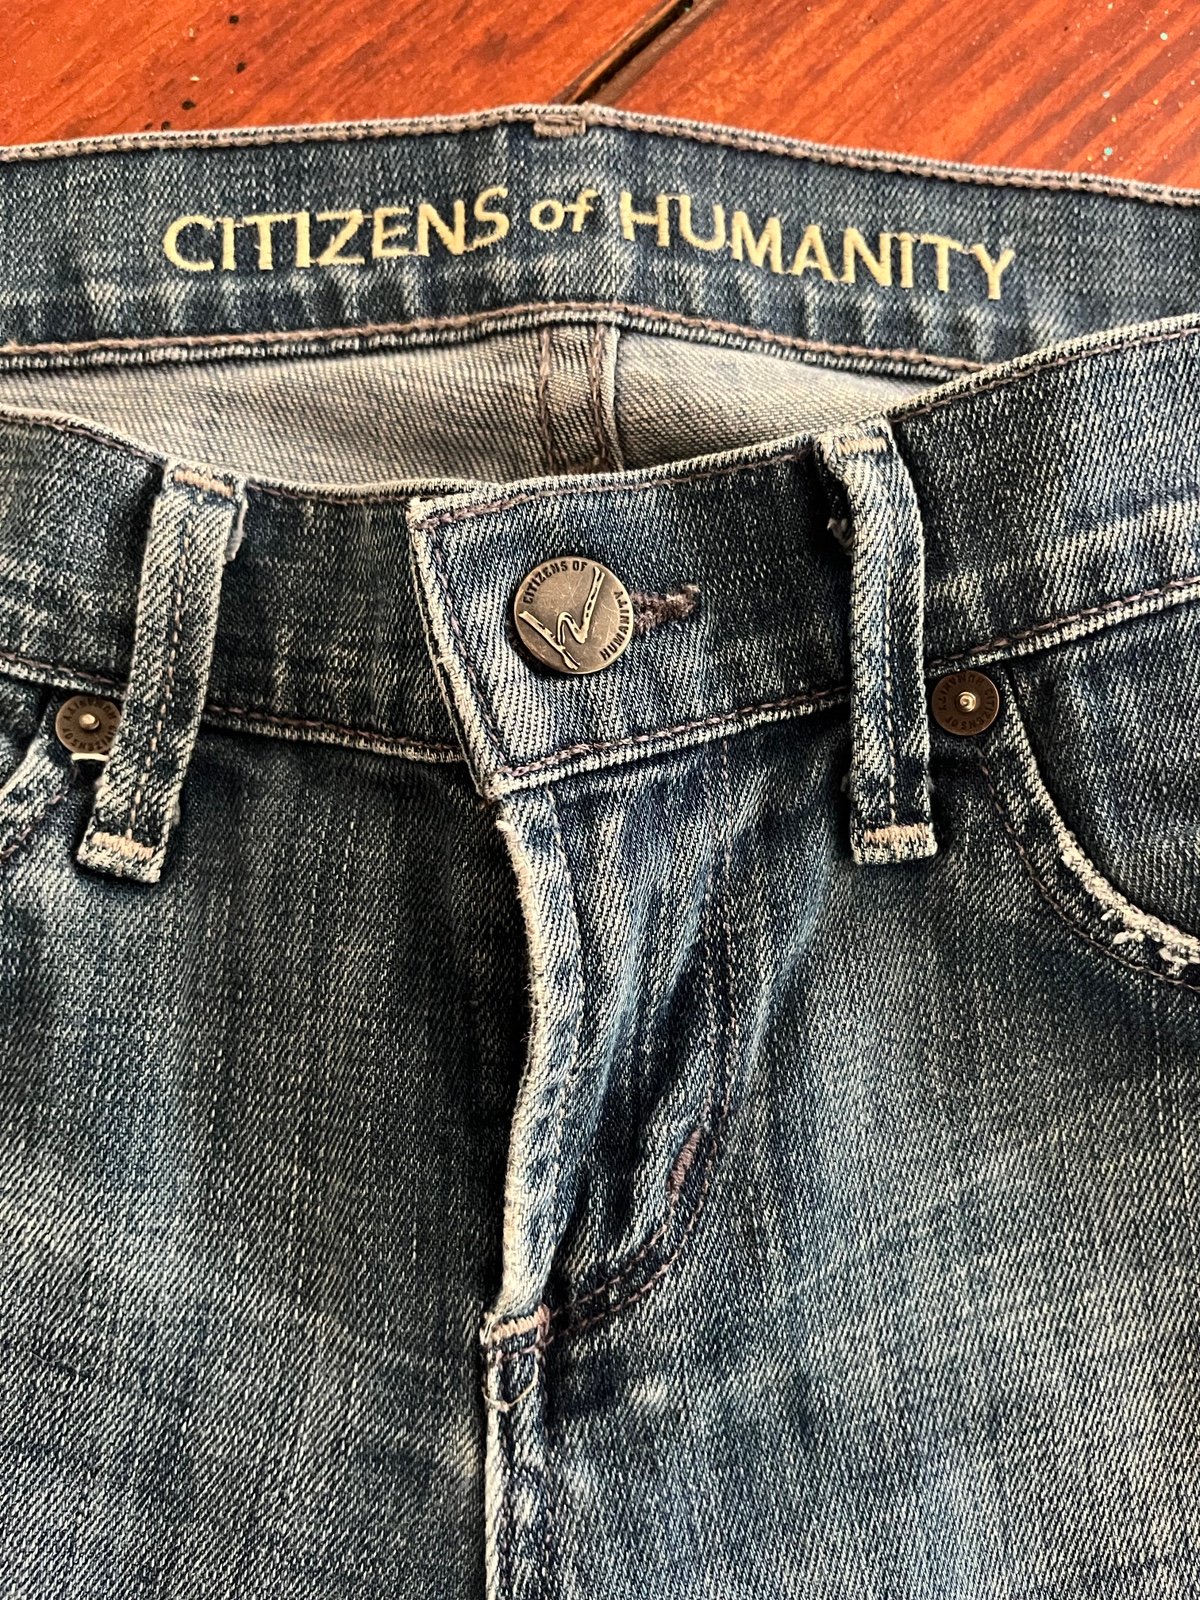 Fashion Citizens of Humanity Boot Cut Jeans NAFCtlKel US Outlet